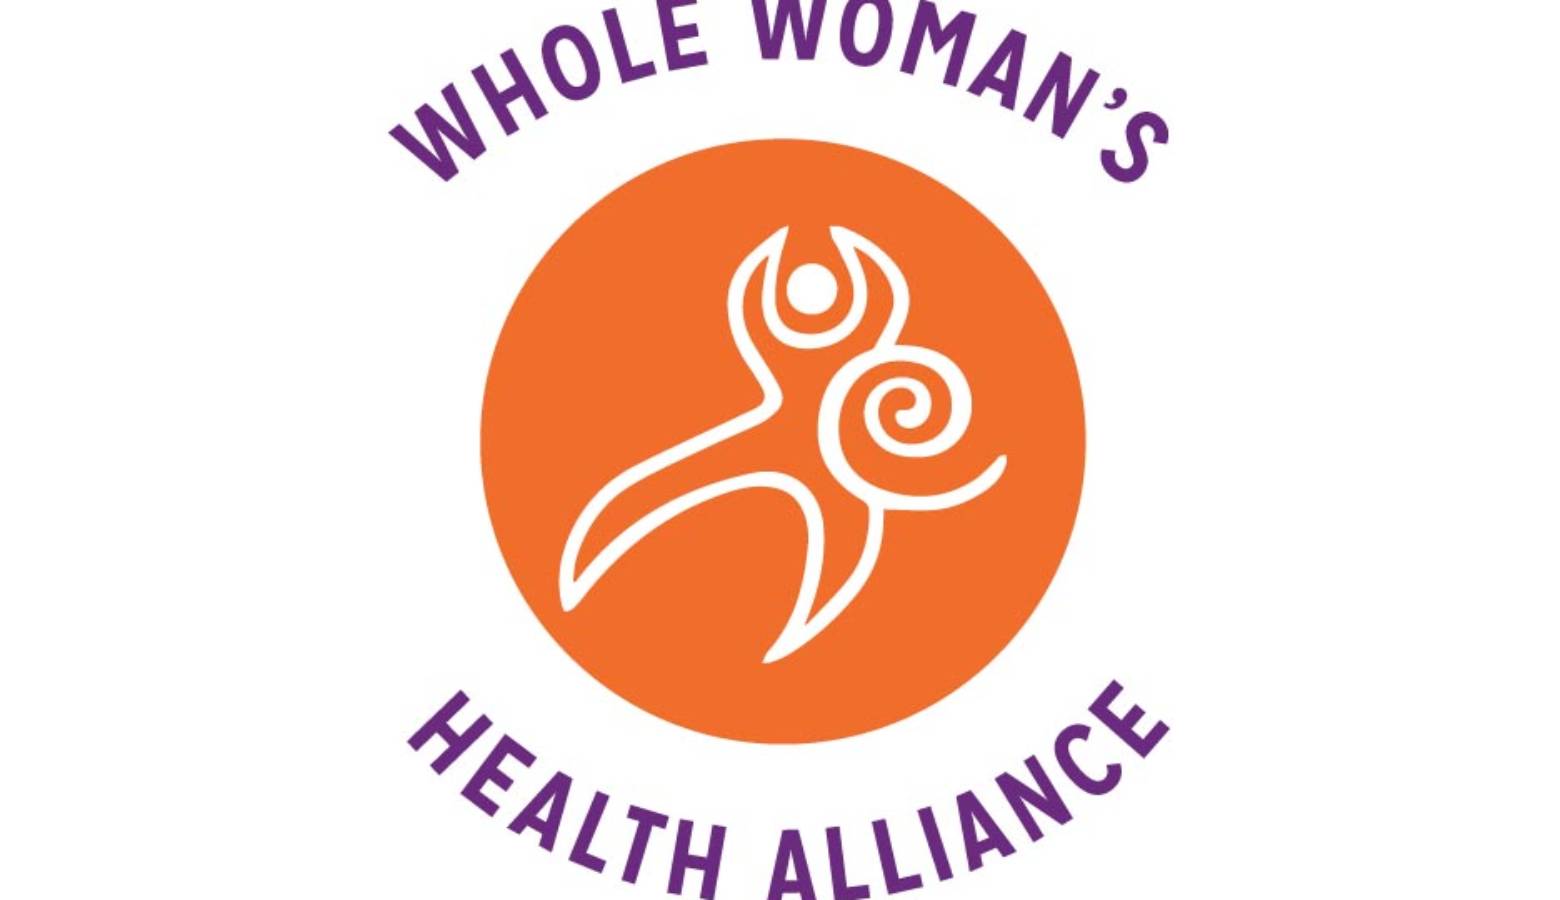 Whole Woman's Health Alliance has been fighting to open a South Bend clinic since 2017. (Whole Woman's Health Alliance)